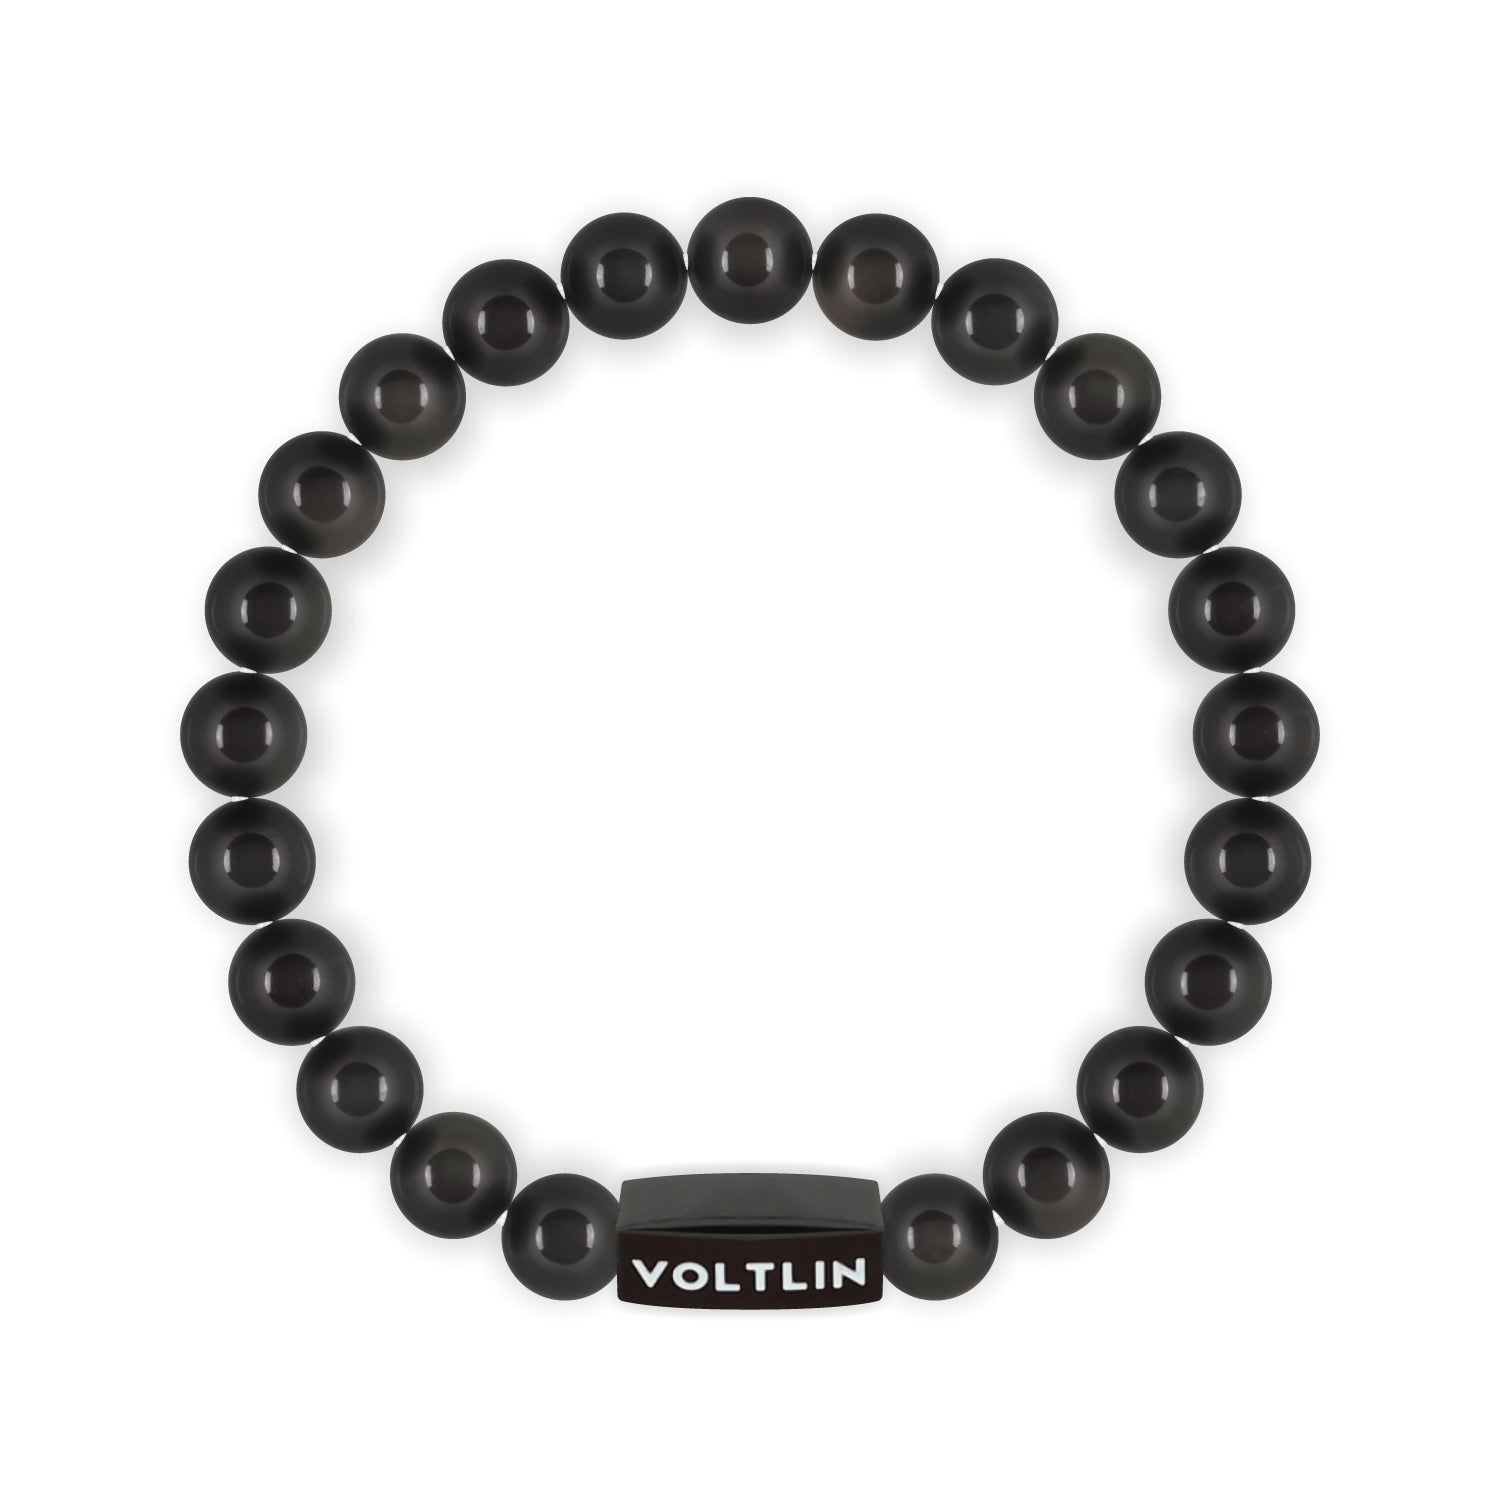 Front view of an 8mm Black Obsidian crystal beaded stretch bracelet with black stainless steel logo bead made by Voltlin